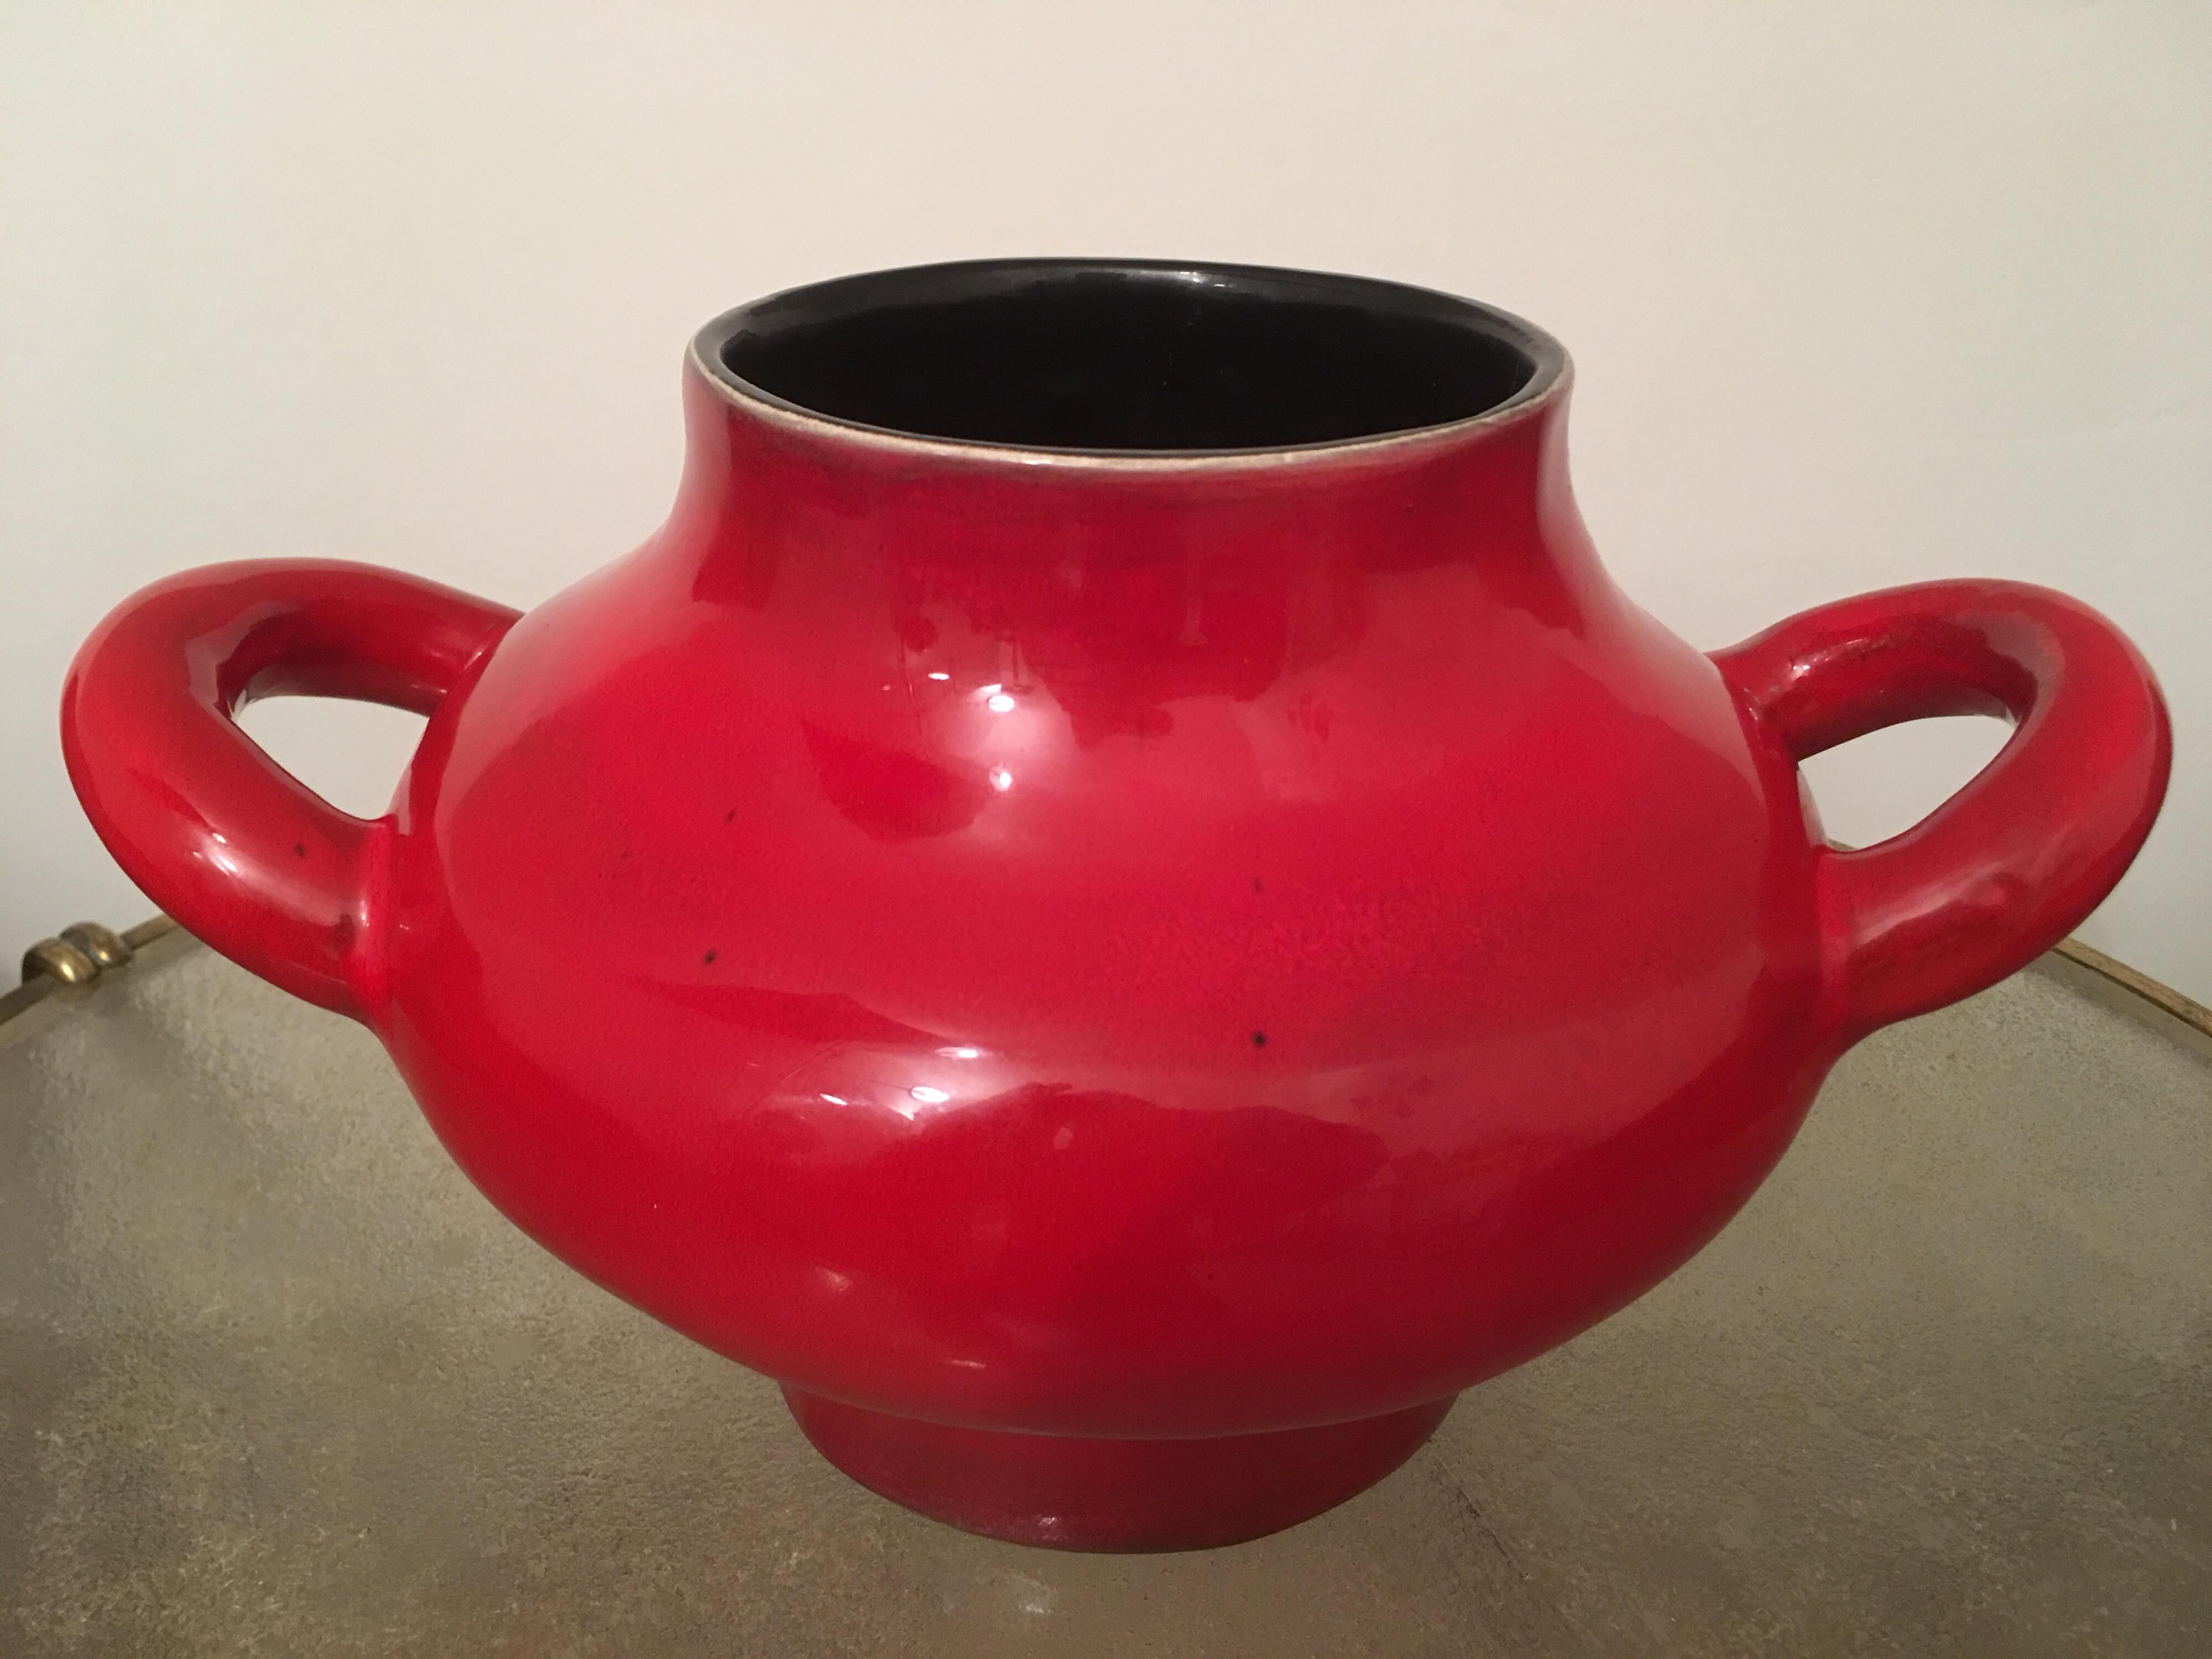 Large ceramic vase or jar with handles attributed to Georges Jouve in 1950s.
Beautiful red and black colors that highlight the original form of this piece.
We find this same red glaze with some black dots on vases rolls and a chalice vase of 1955